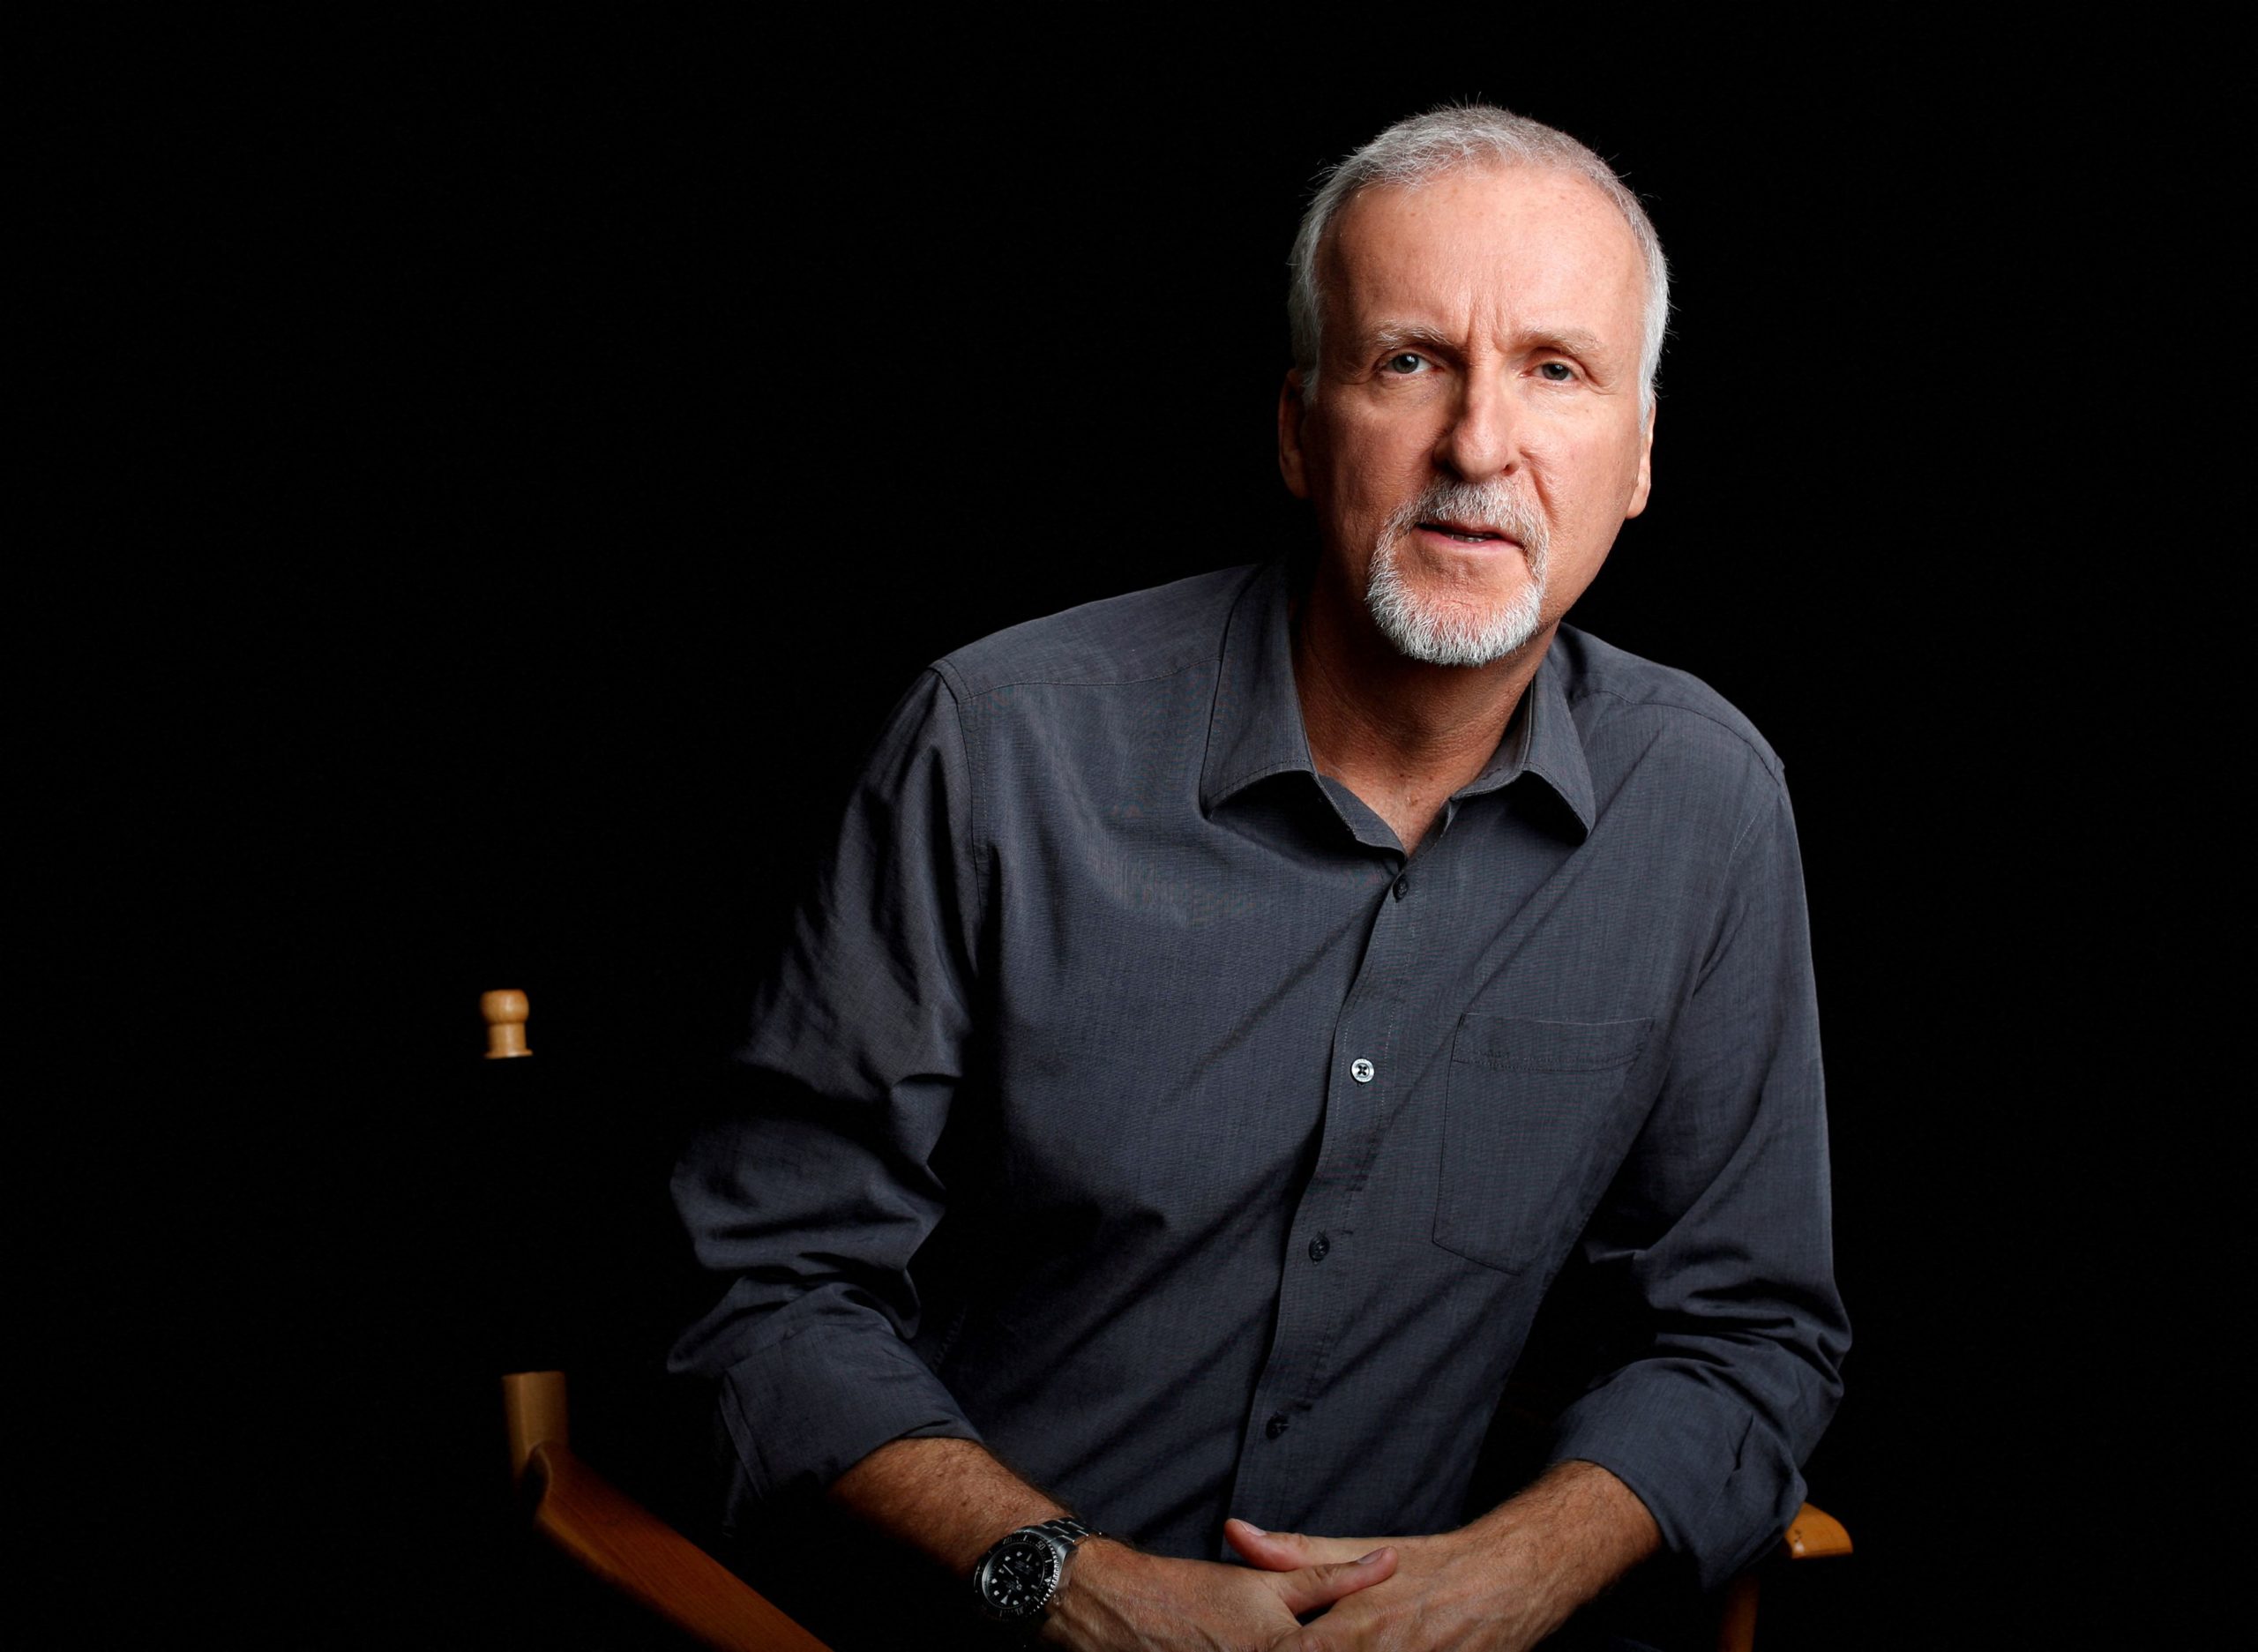 Director James Cameron poses for a portrait in Manhattan Beach, California April 8, 2014. REUTERS/Lucy Nicholson/File Photo